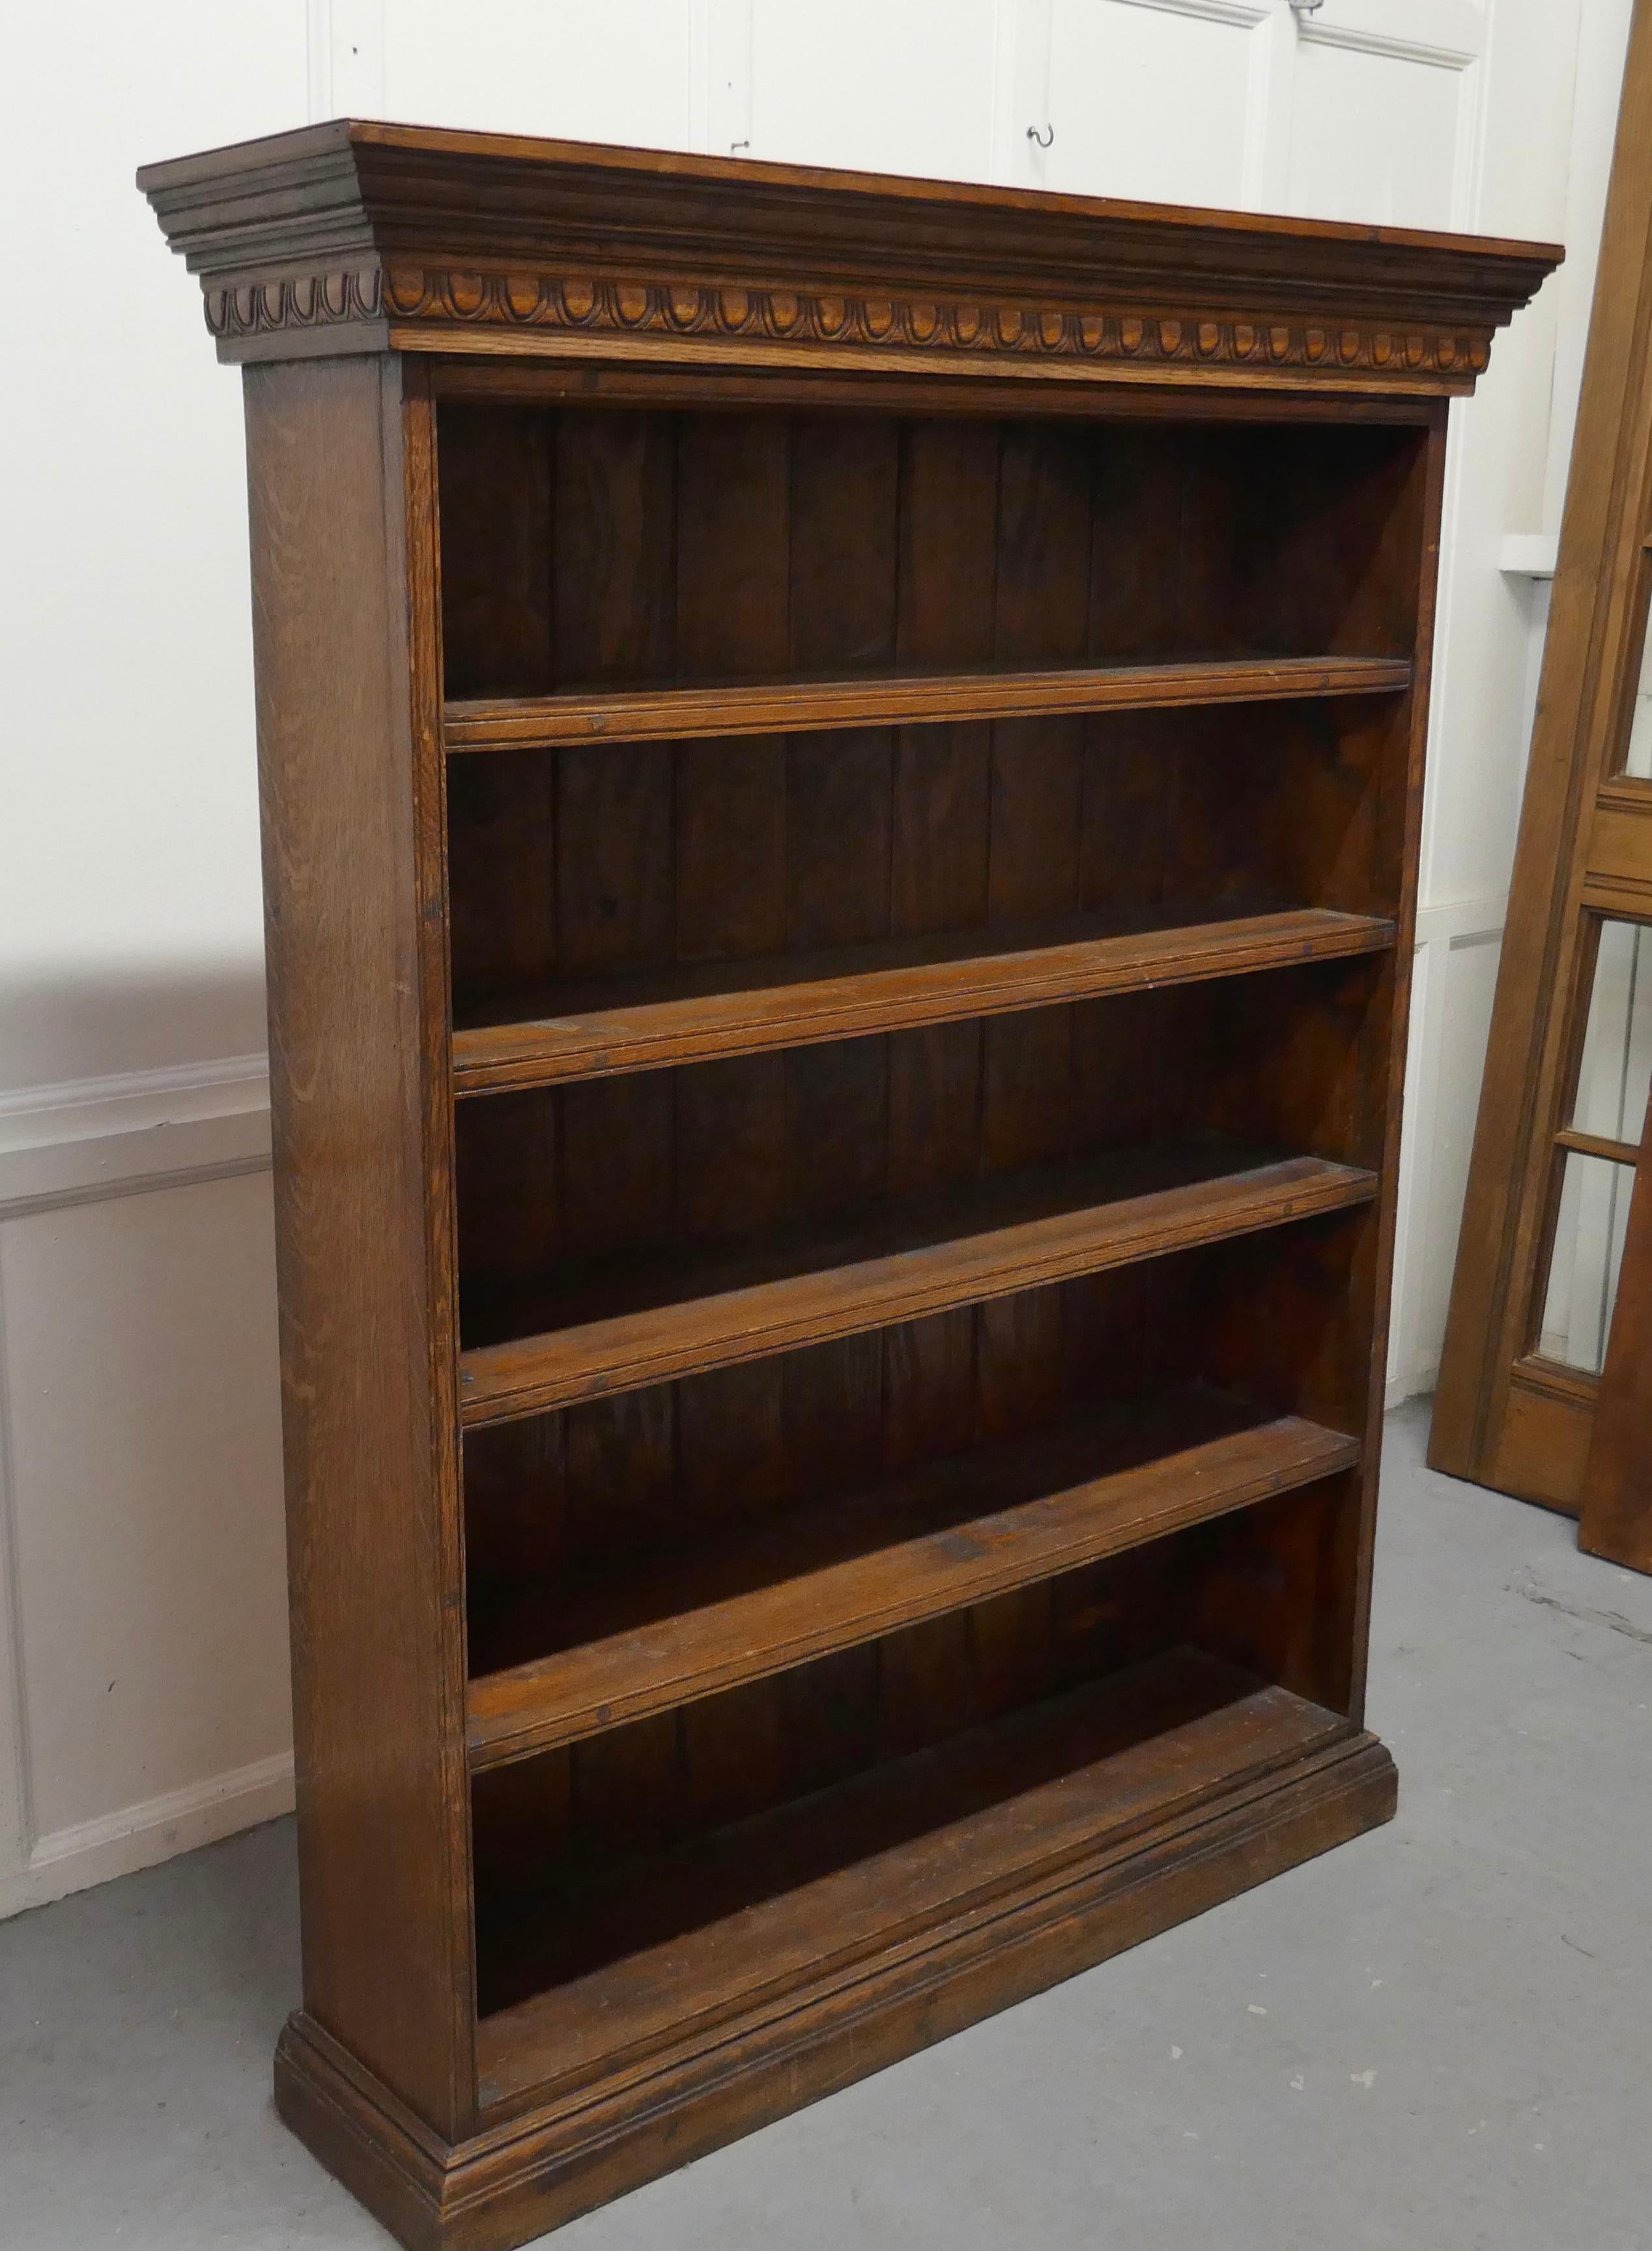 Arts and Crafts open oak bookcase with secret compartment

This oak bookcase has reeded fronts to the shelves and sides, it stands on a neat plinth with large carved cornice at the top
The bookcase is in good attractive condition
This one hides